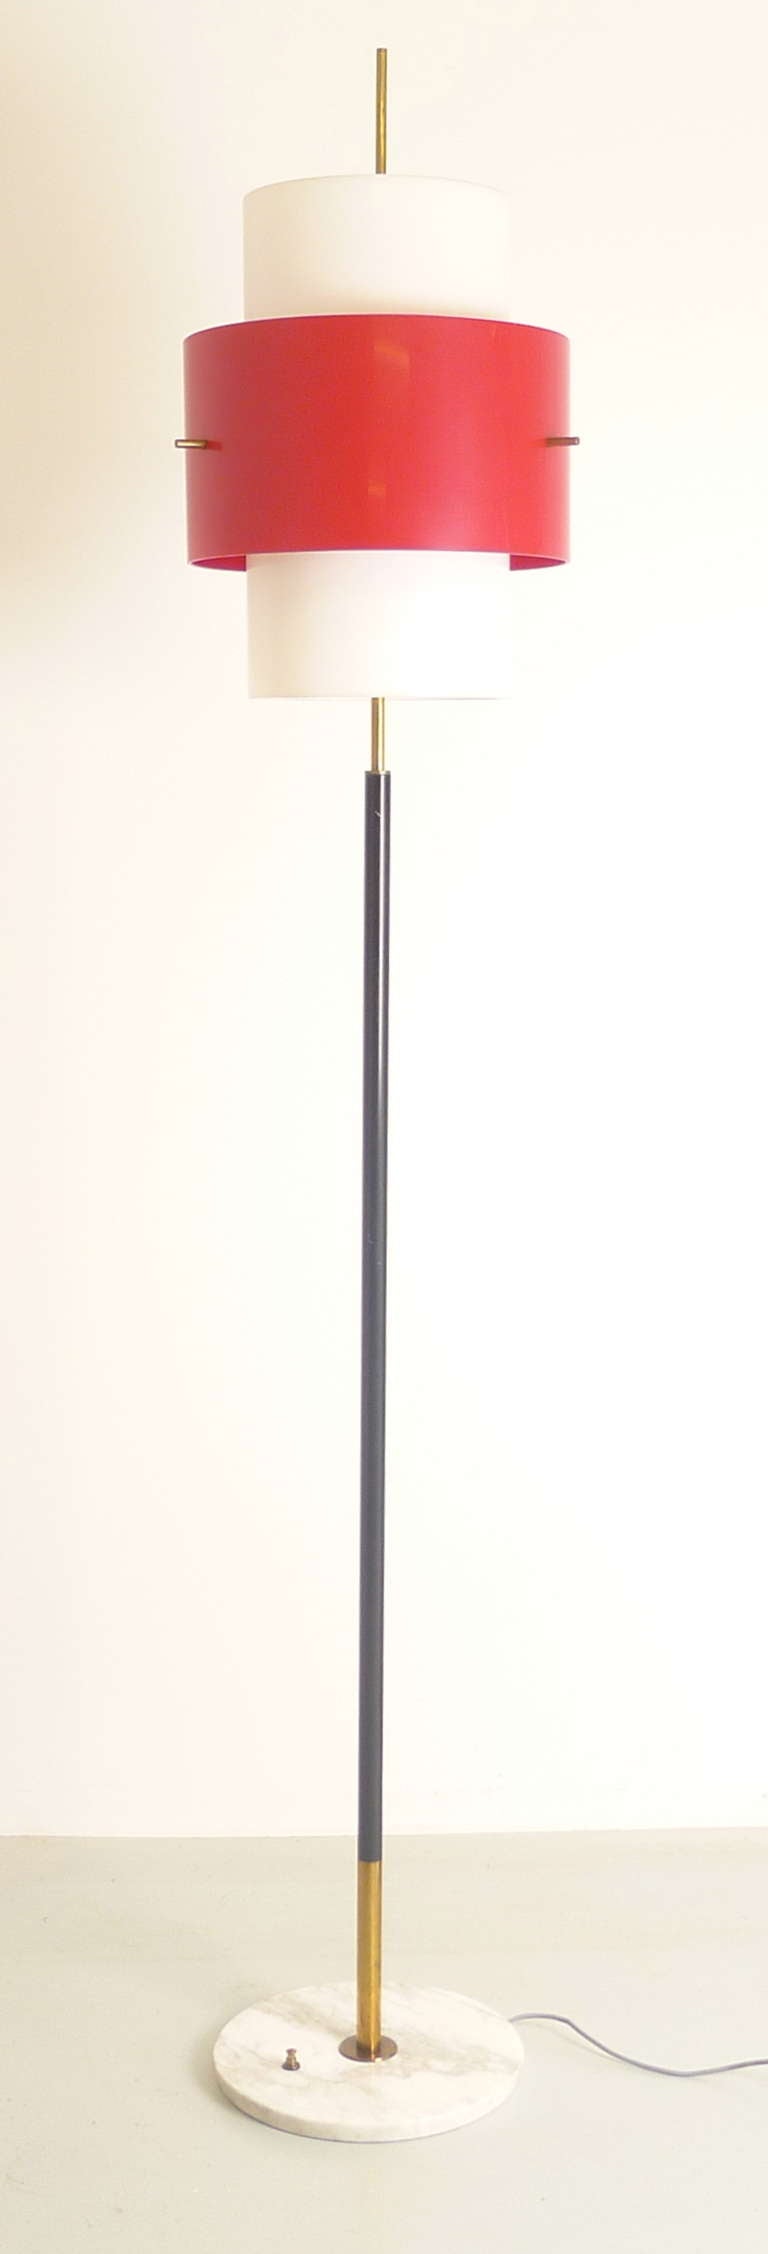 Stilnovo floor lamp , Italian, 1960s , marble base incorporating foot switch , brass and black enameled central pole supporting inner shade of white perspex and outer in red. Shades conceal three bulb holders to which there is an applied yellow